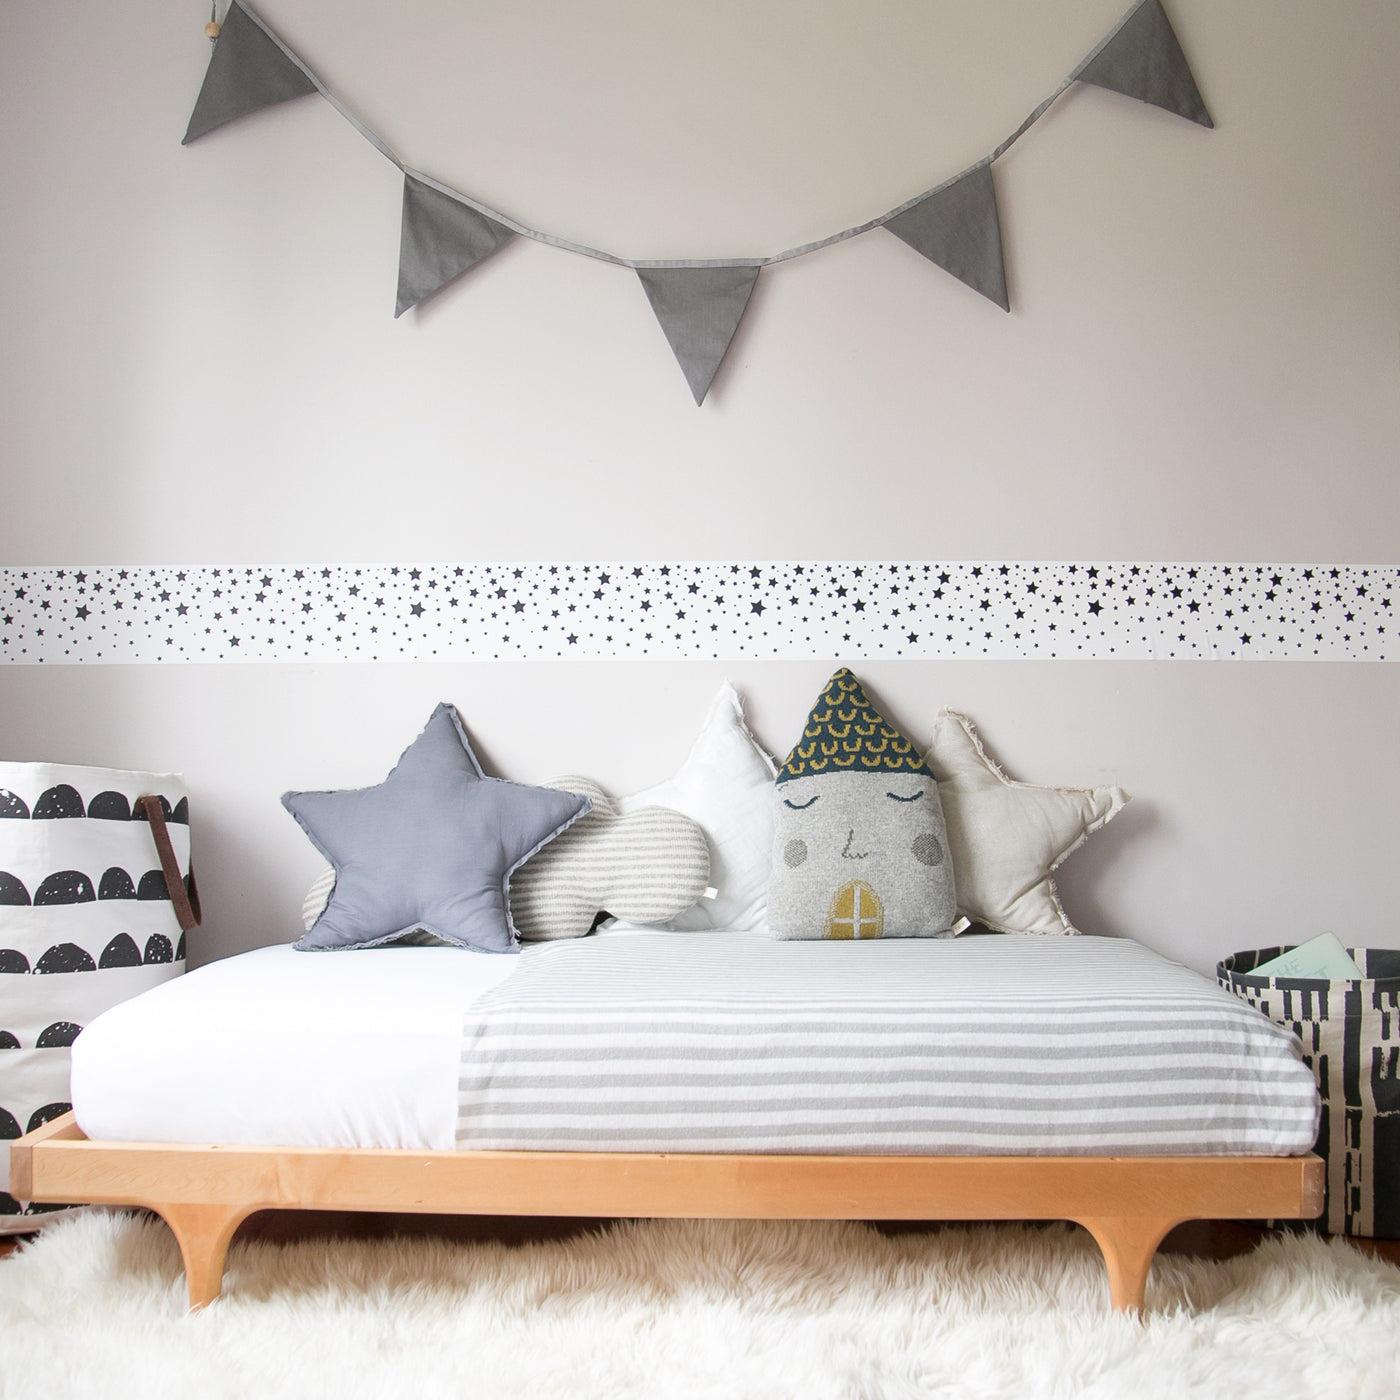 A strip of Tempaper's Falling Stars Border Peel And Stick Wallpaper in black and white shown above a bed in a bedroom.